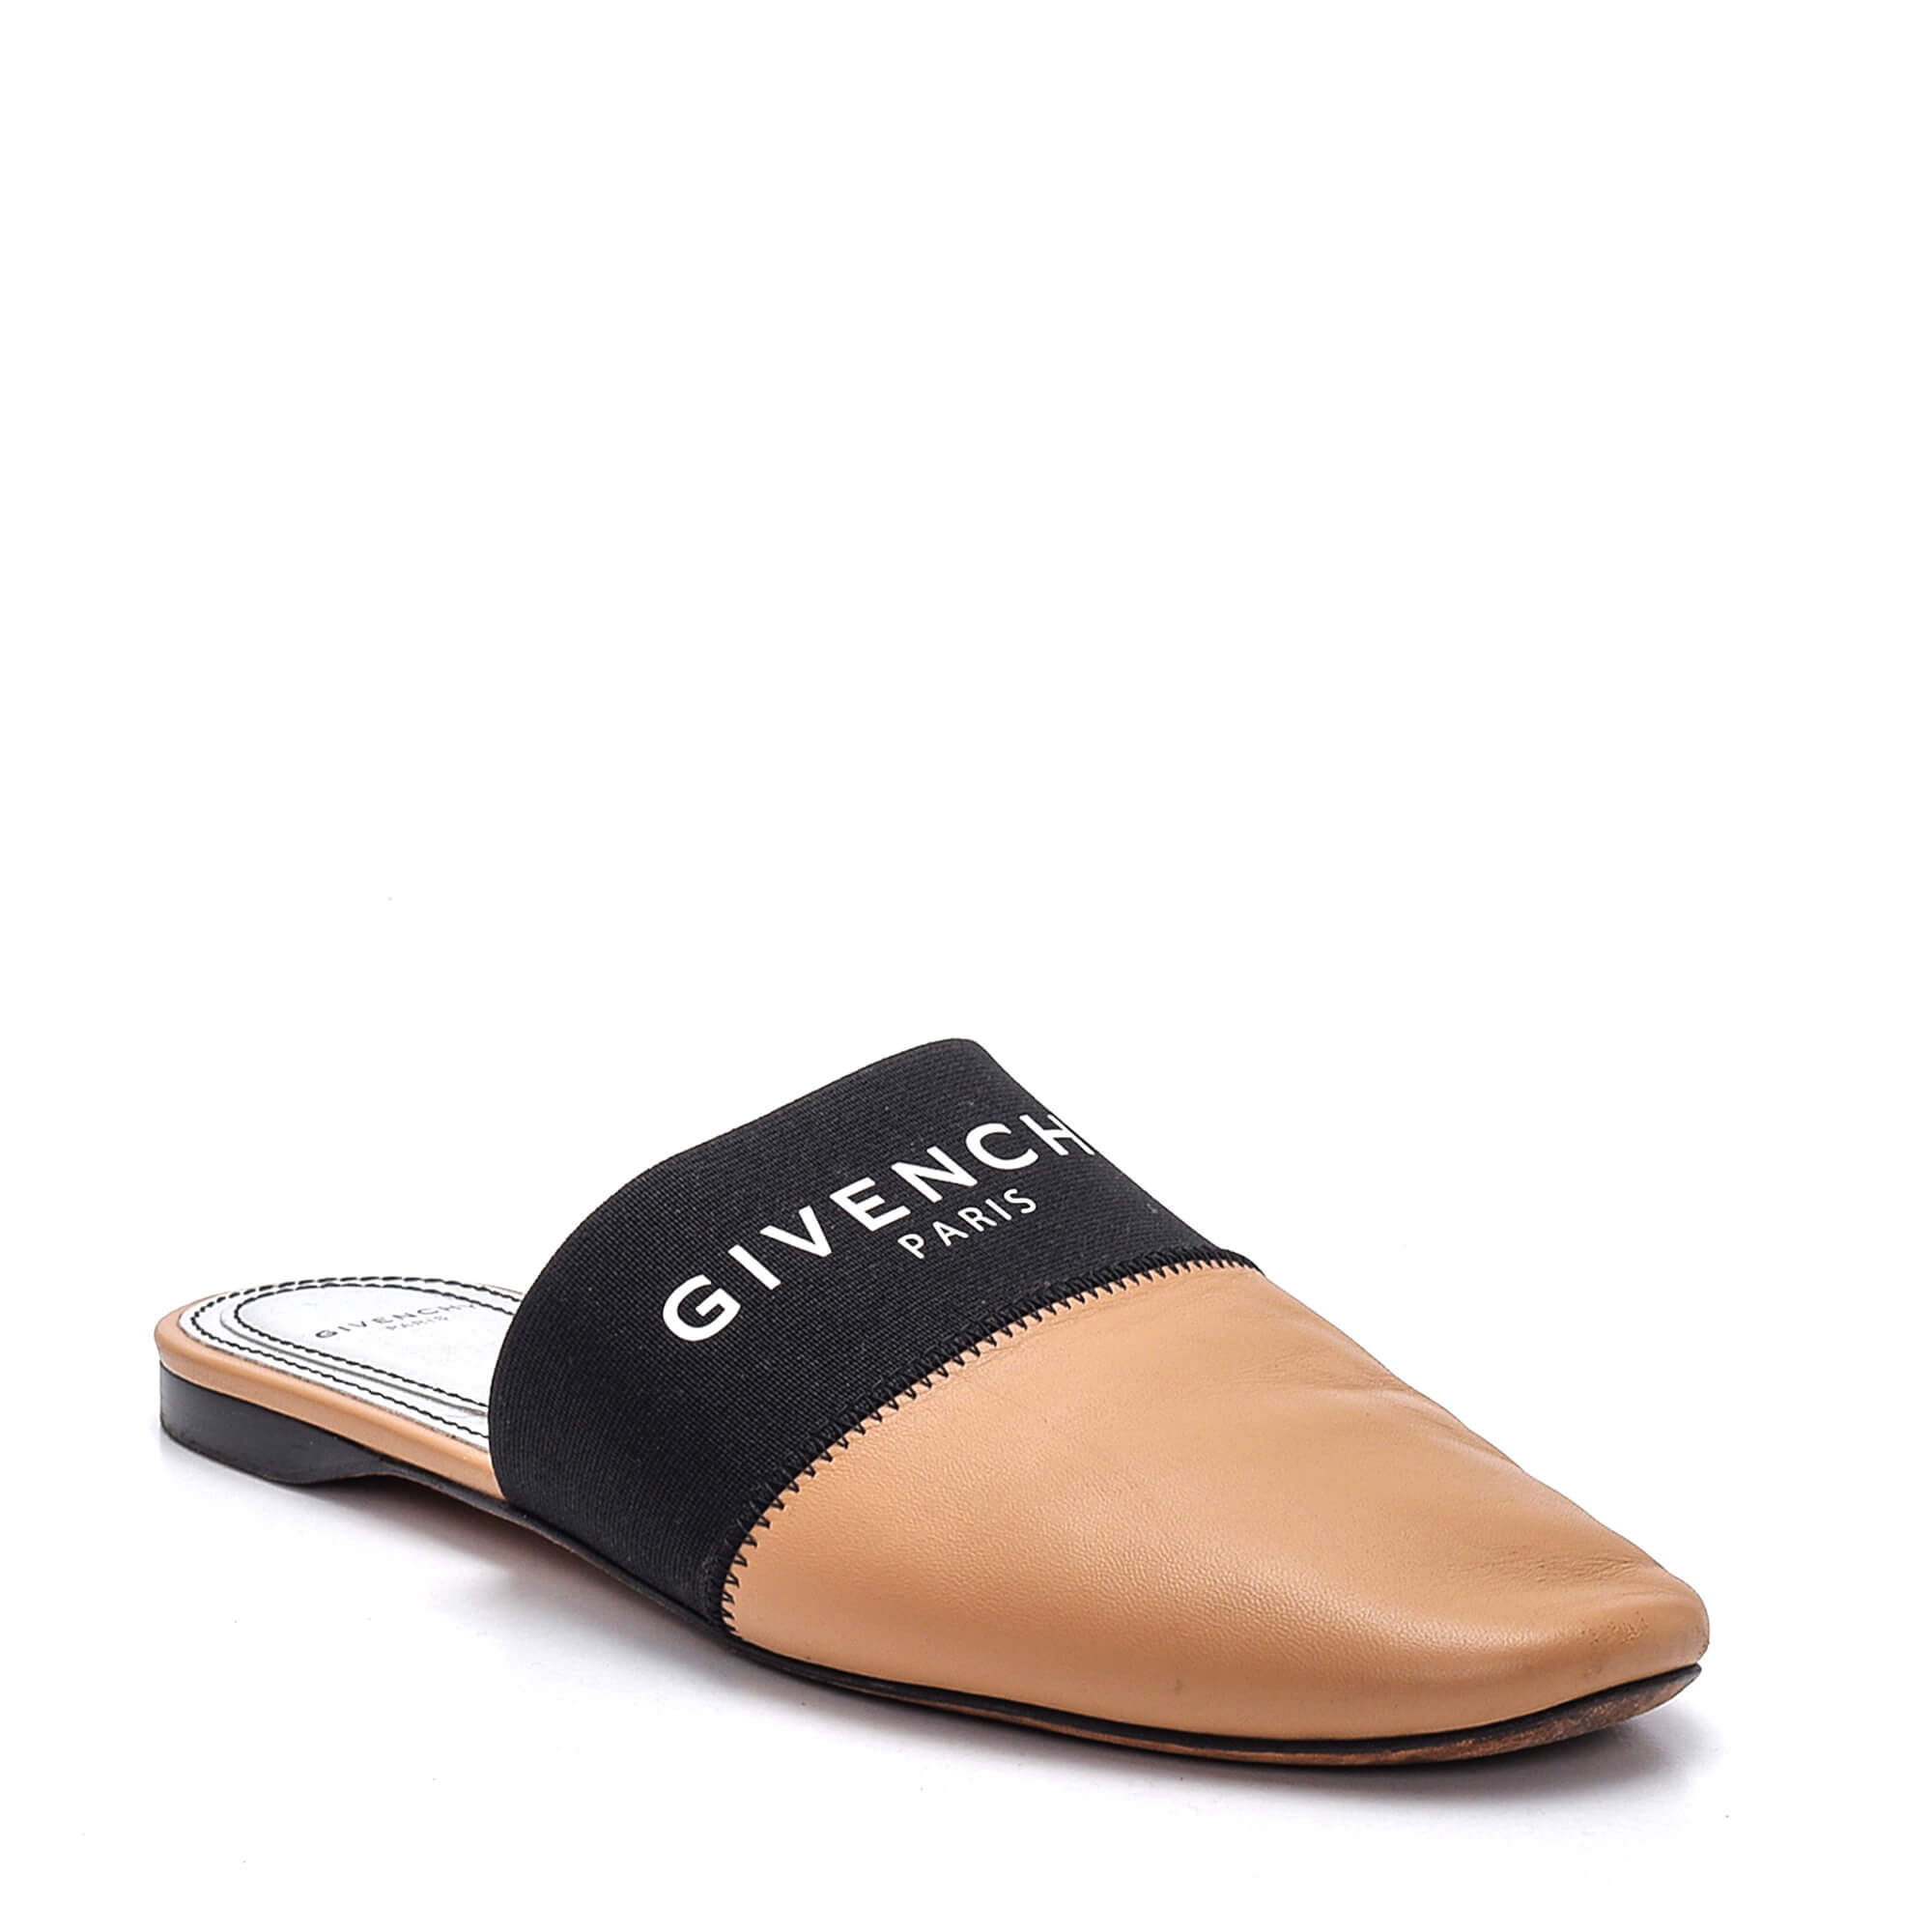 Givenchy - Nude Leather Slipper 